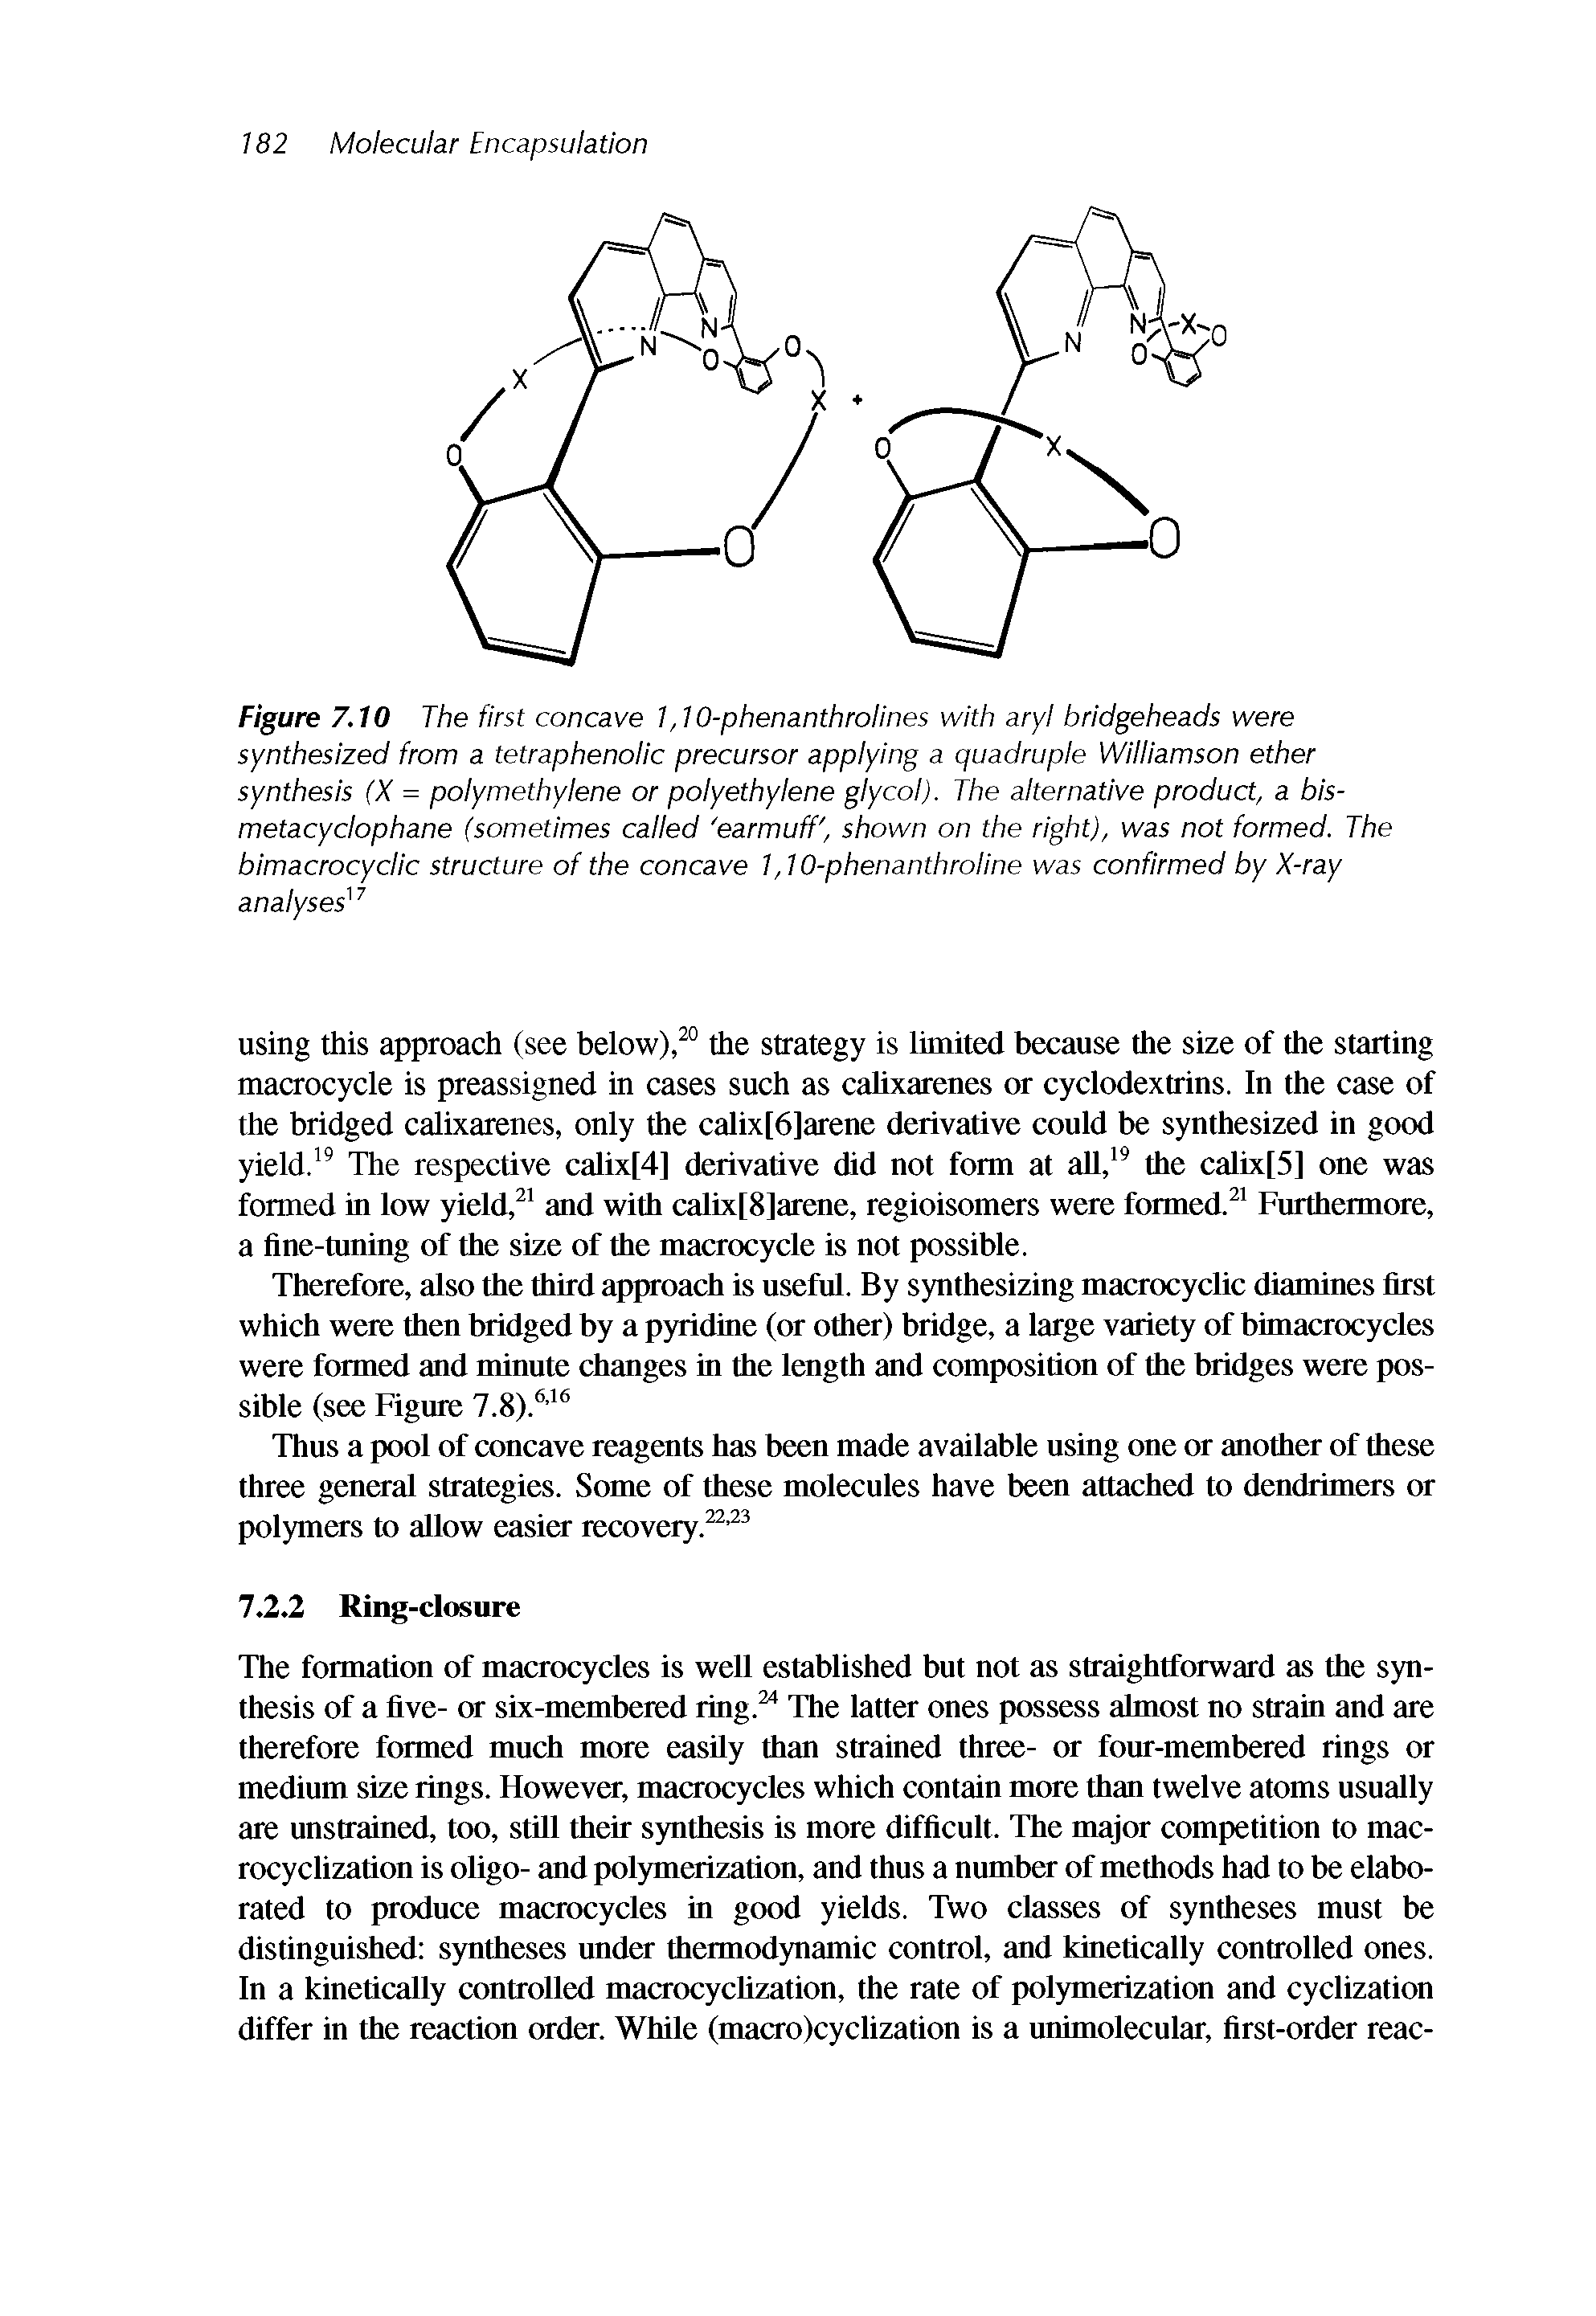 Figure 7.10 The first concave 1,10-phenanthrolines with aryl bridgeheads were synthesized from a tetraphenollc precursor applying a quadruple Williamson ether synthesis (X = polymethylene or polyethylene glycol). The alternative product, a bis-metacyclophane (sometimes called earmuff, shown on the right), was not formed. The bimacrocyclic structure of the concave 1,10-phenanthroline was confirmed by X-ray analyses ...